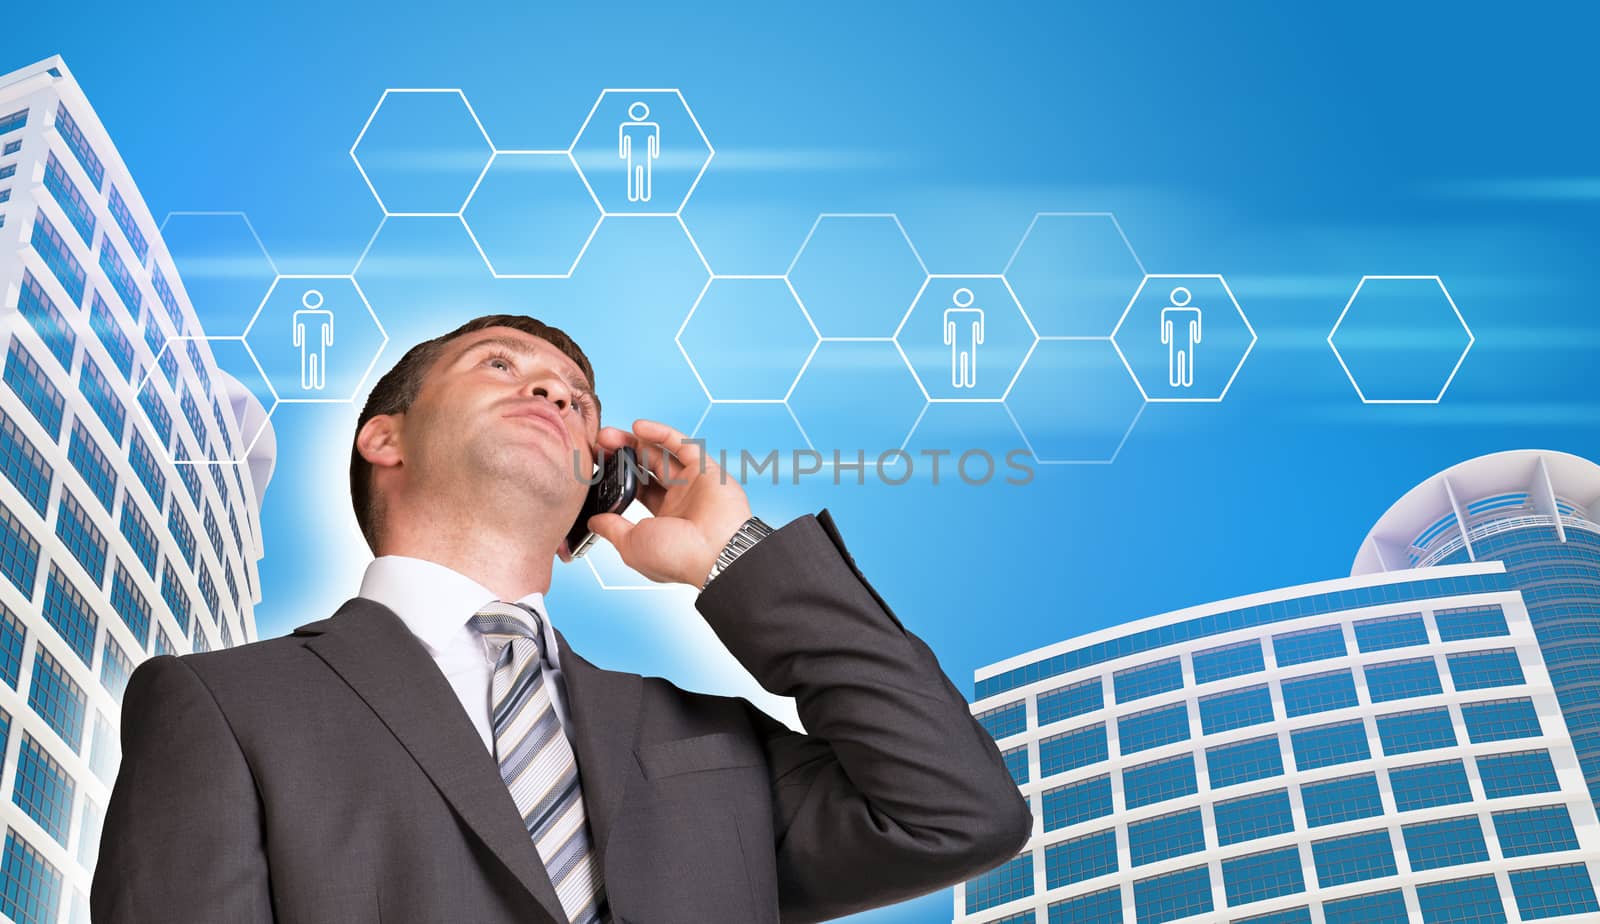 Businessman talking on the phone. Skyscrapers, sky and hexagons with people icons in background